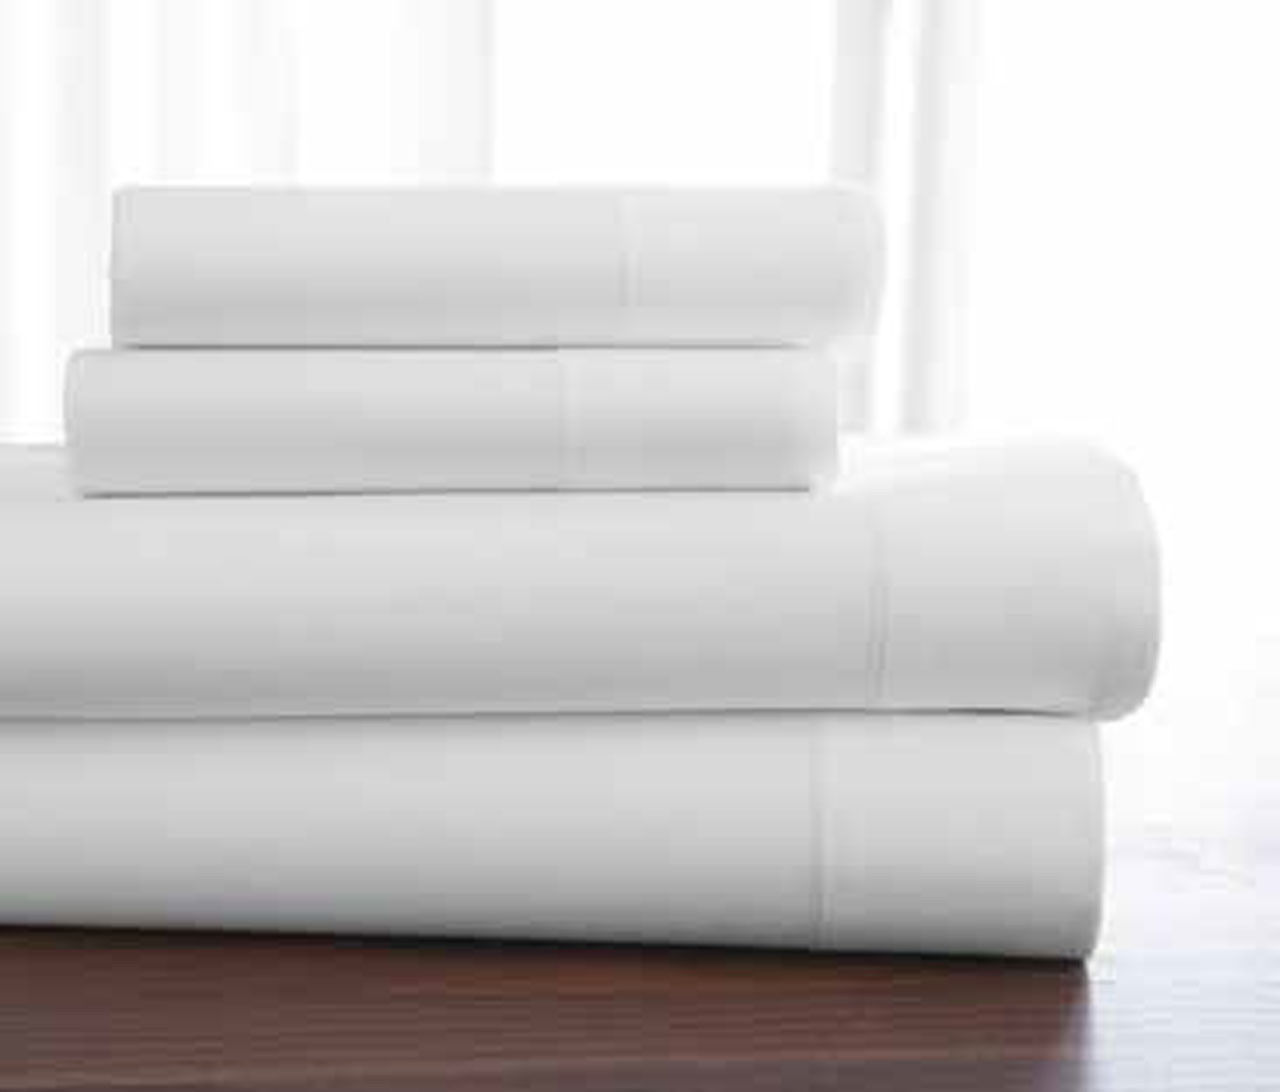 Are these Welspun T-400 hygrocotton sheets pre-washed?